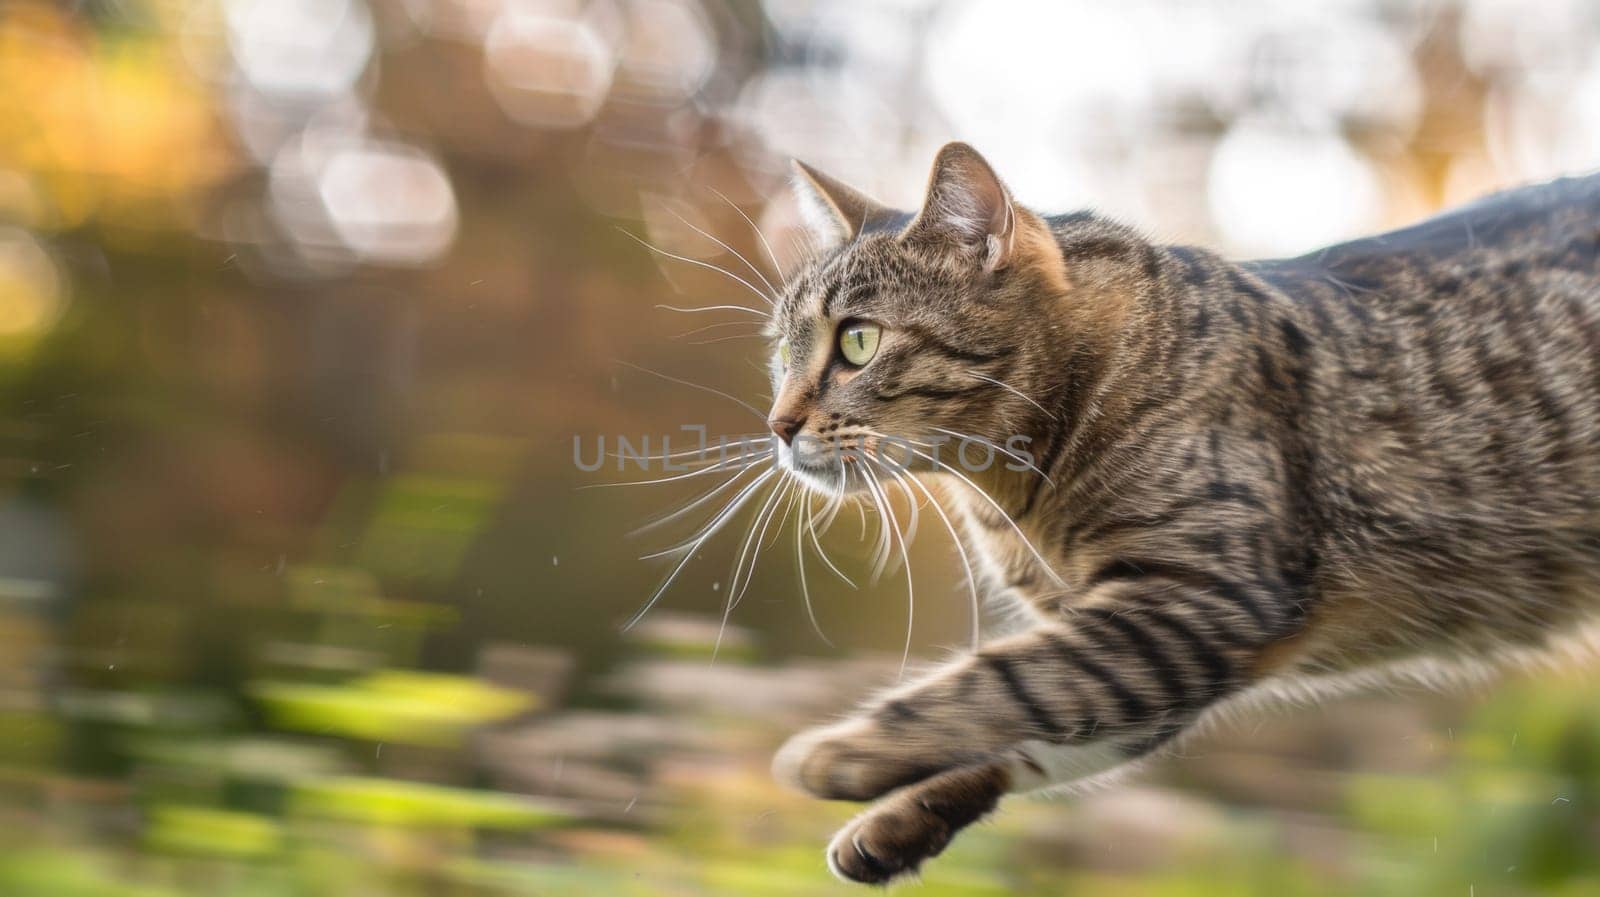 A cat running through the air with its eyes open, AI by starush